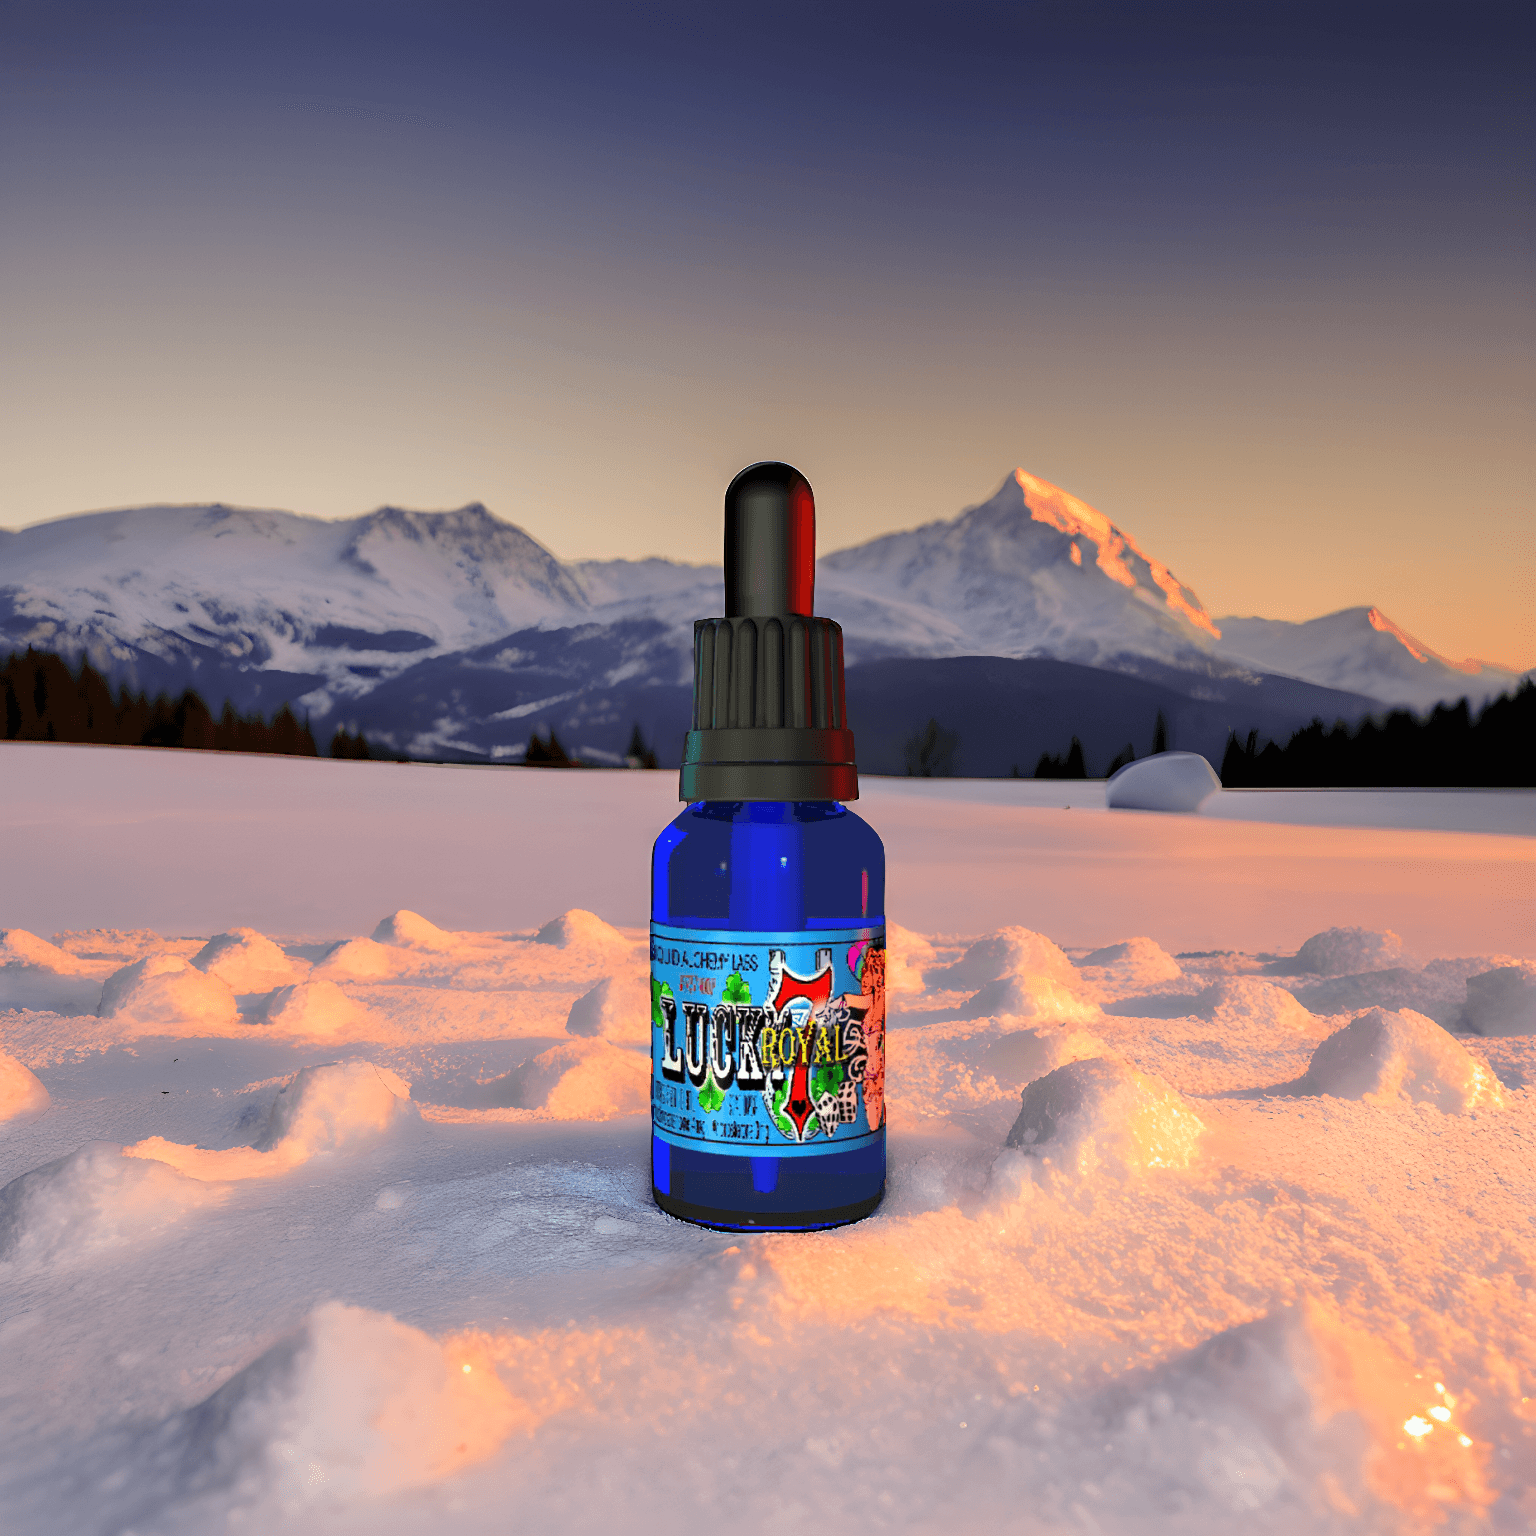 LUCKY 7 ROYAL™ Pheromone Oil bottle in a snowy landscape with mountain sunset backdrop. Royal Pheromones, Pheromone Perfumes, Pheromone Colognes.